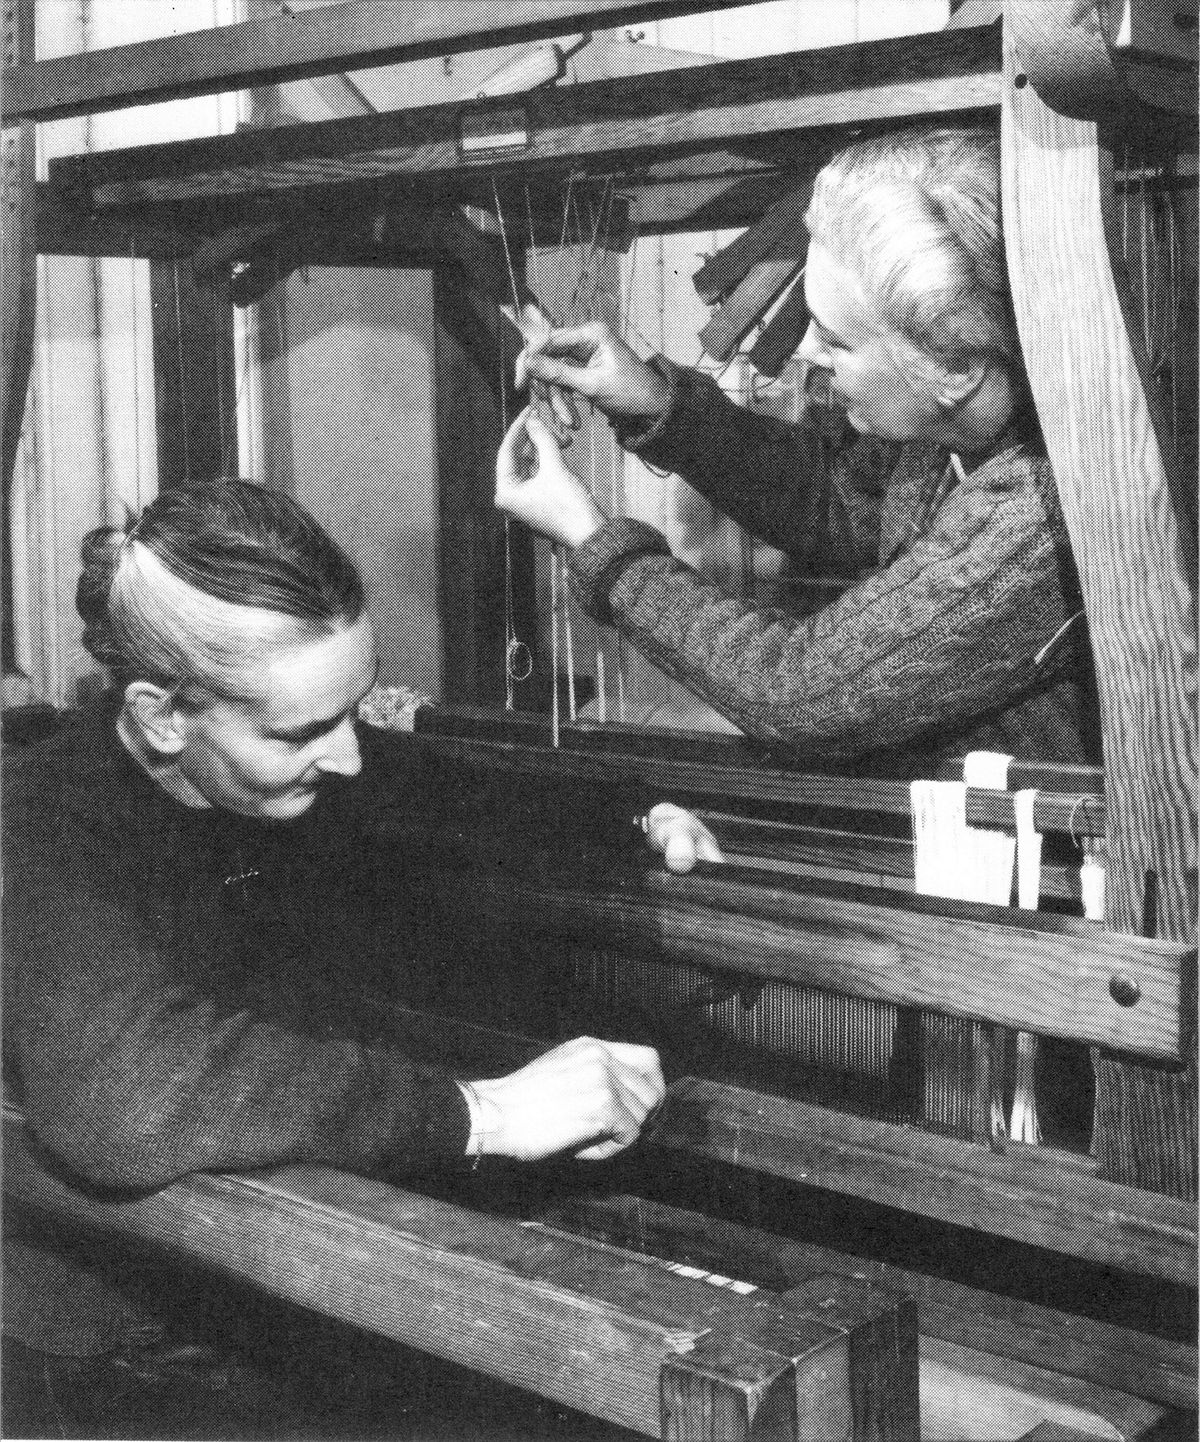 Hilary Bourne (left) and Barbara Allen in 1951, setting up a loom. As with so many other women in the shadows, the work and life of the couple could not be revealed, let alone celebrated The Ditchling Museum of Art + Craft